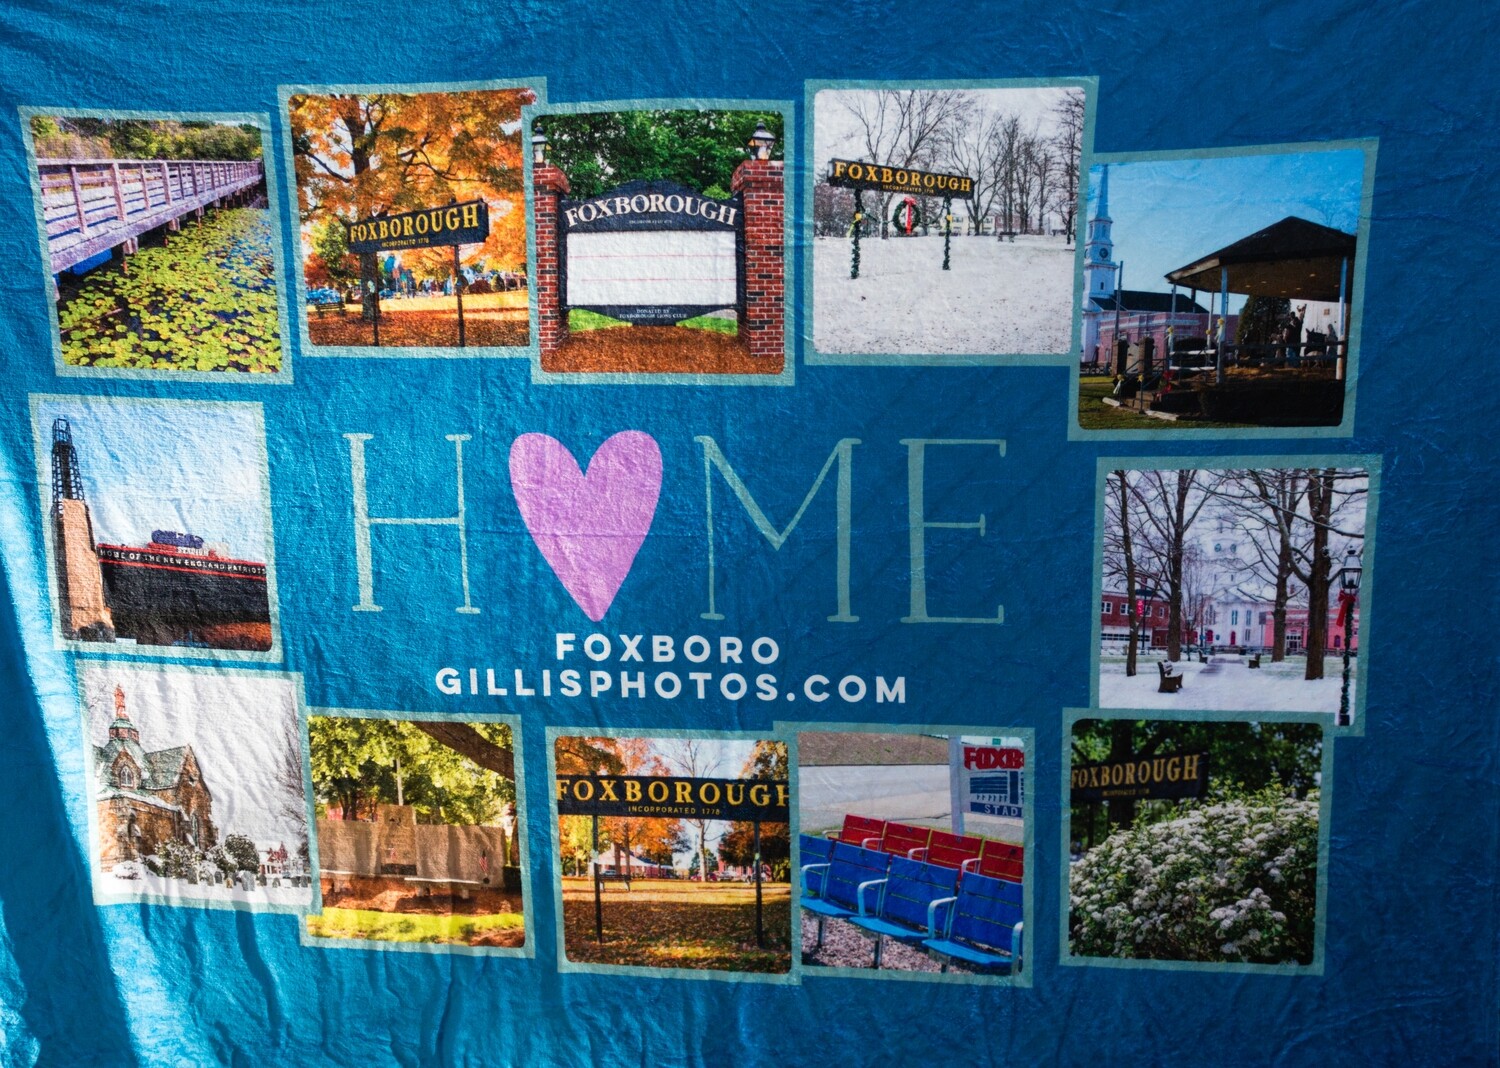 Special Order--Foxboro Gallery-“Home”- Extra Plush 60"x 80" large Warm Photo Image Fleece Blanket-Unique Images of Foxboro